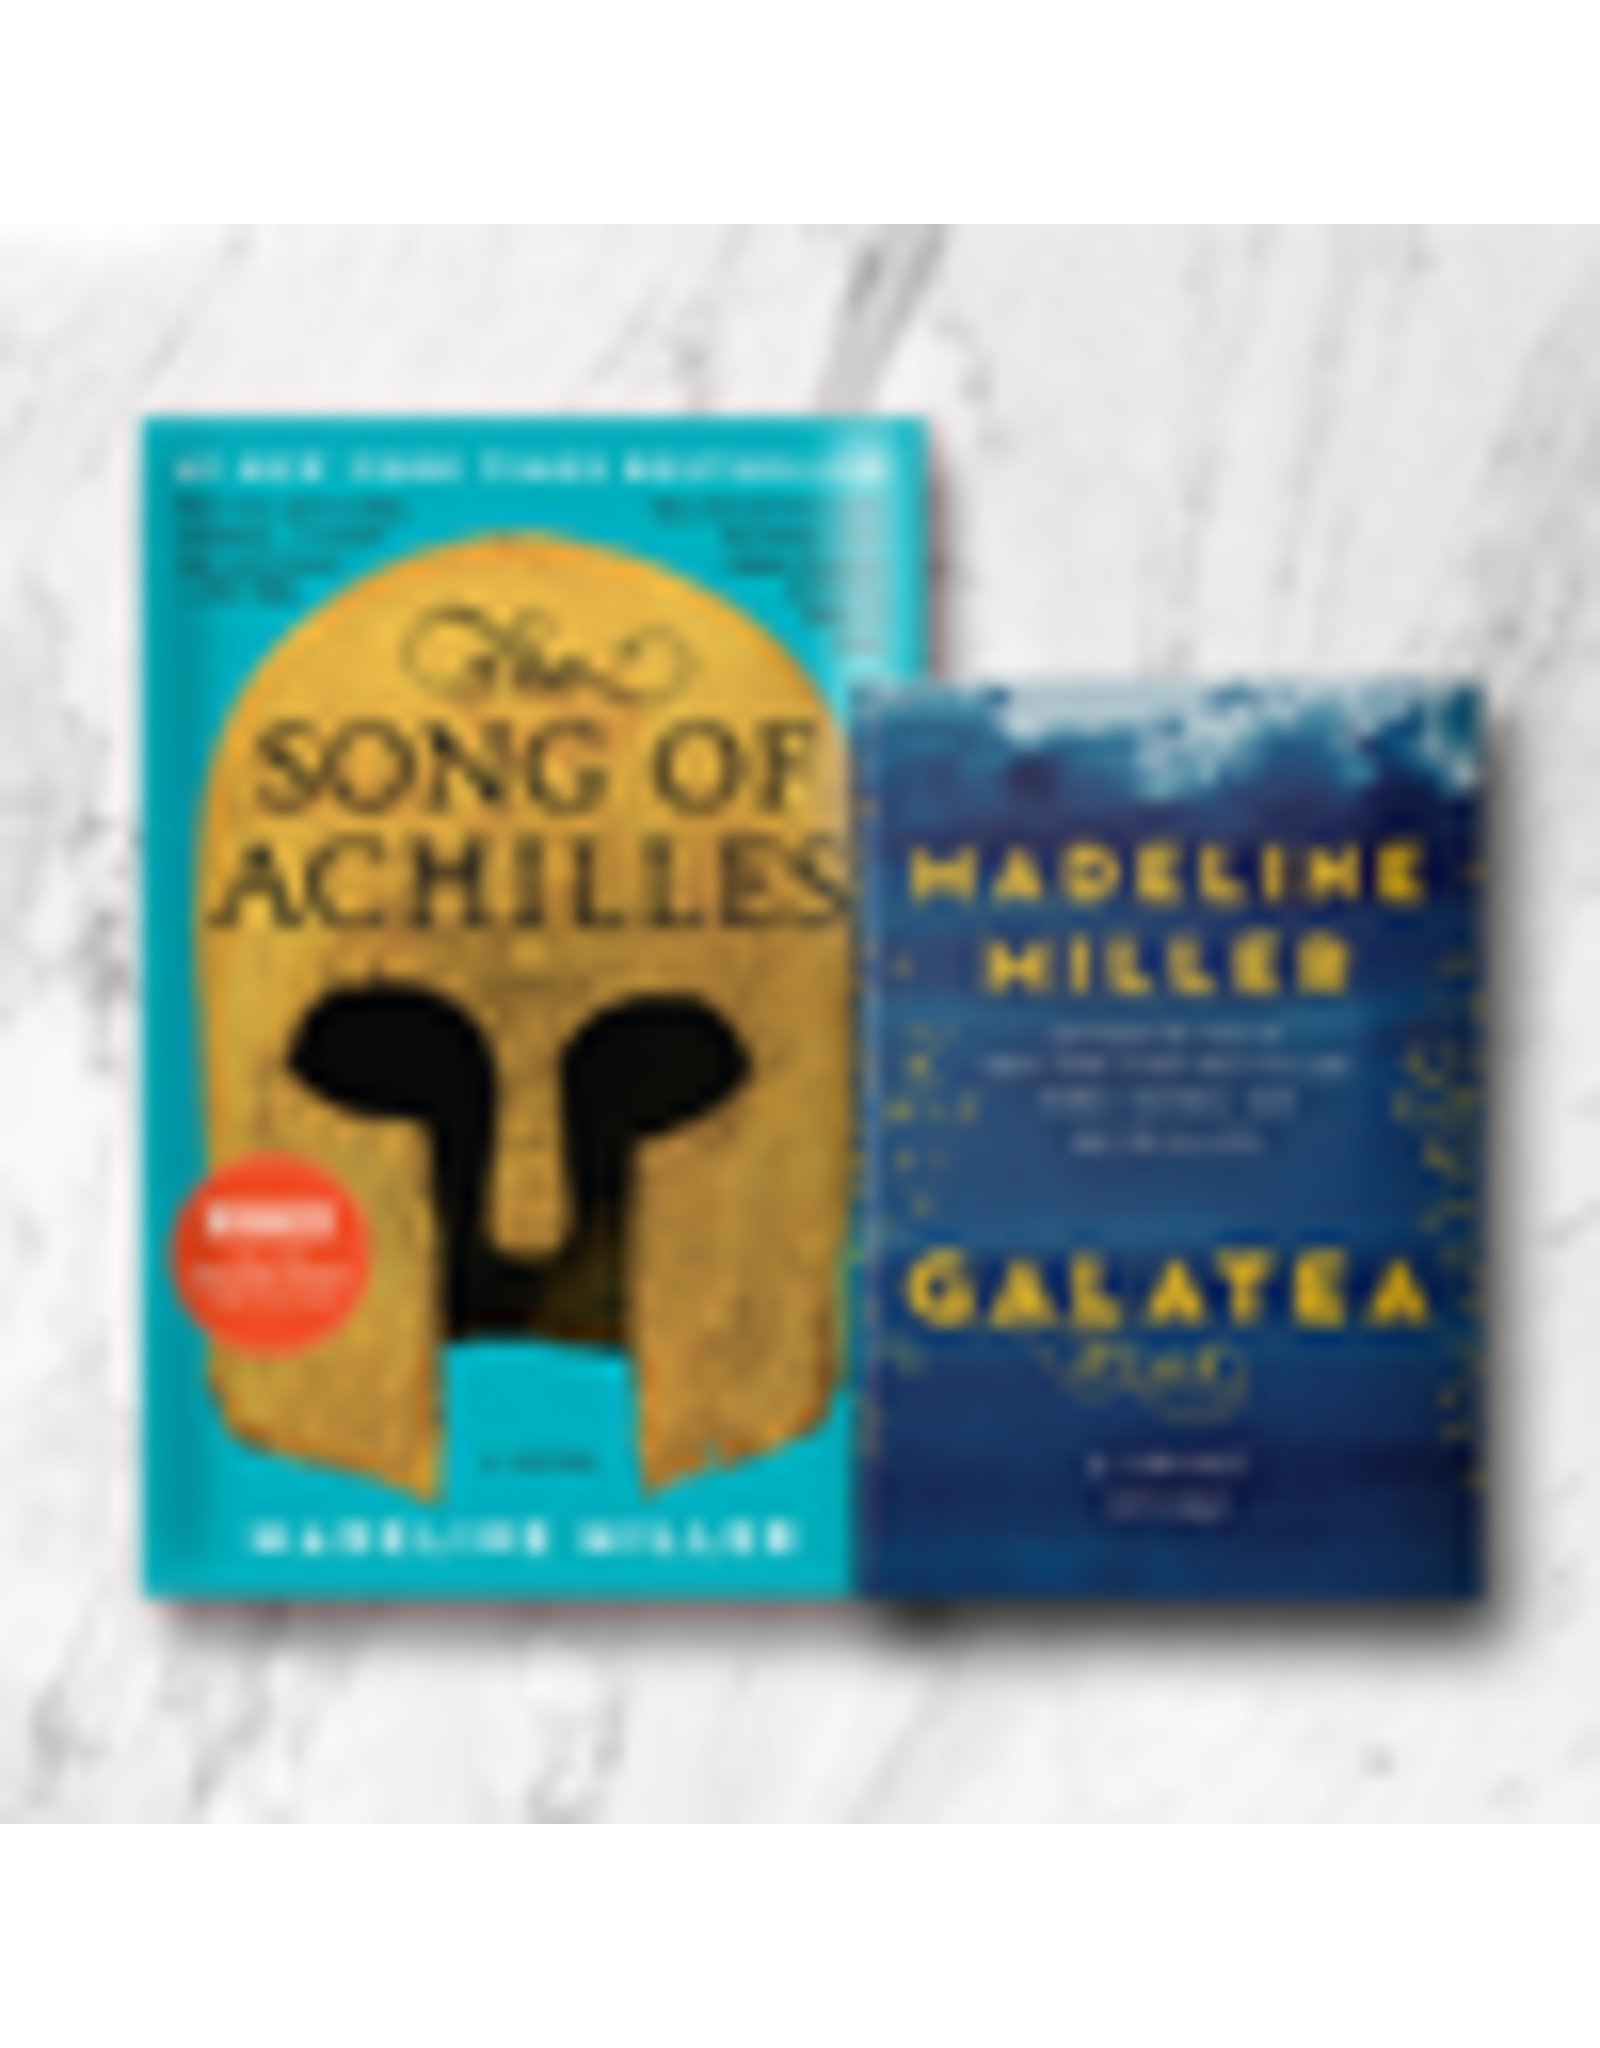 Books Galatea: A Short Story by Madeline Miller